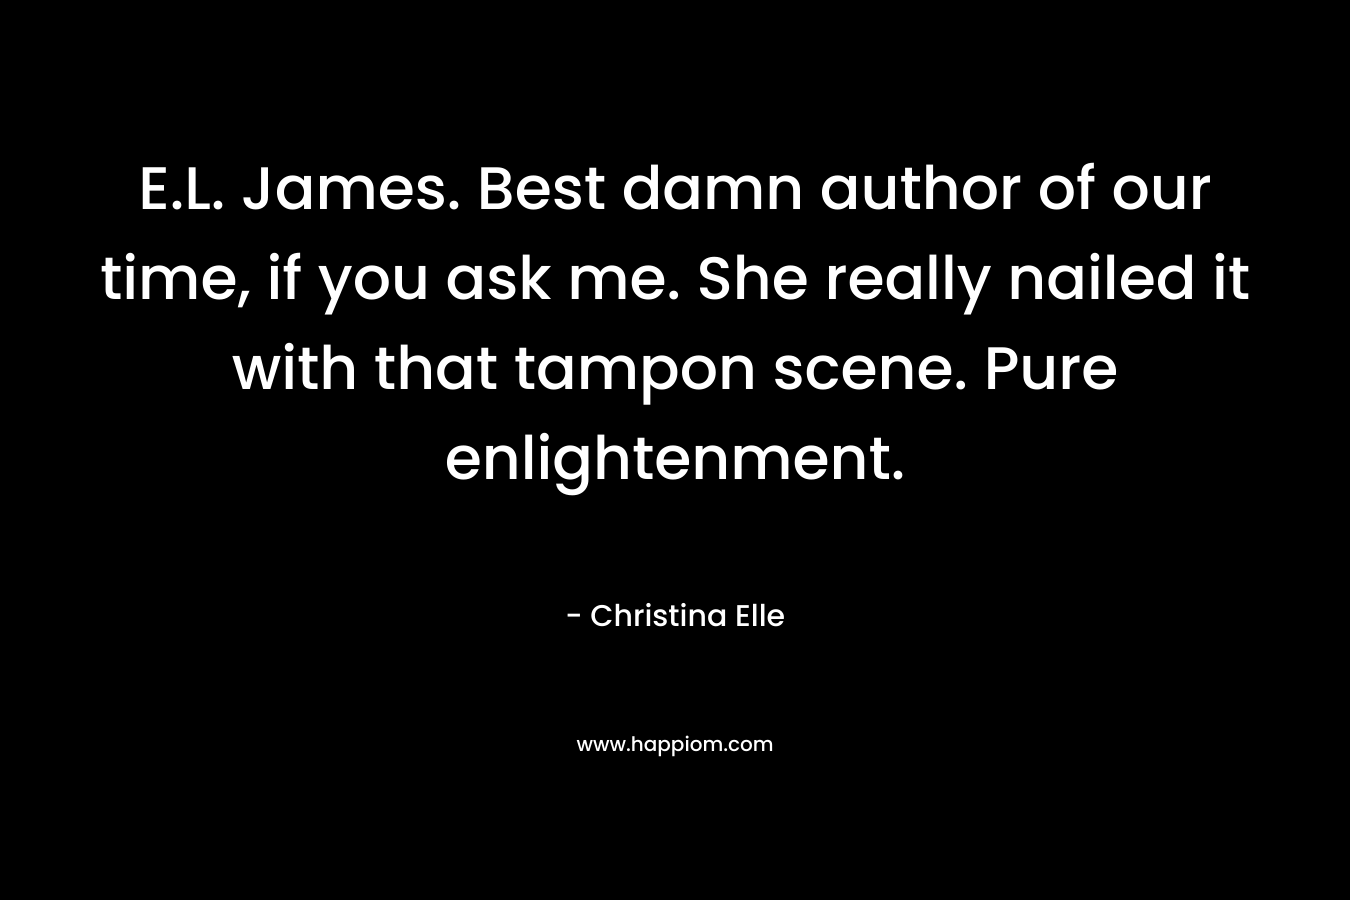 E.L. James. Best damn author of our time, if you ask me. She really nailed it with that tampon scene. Pure enlightenment.